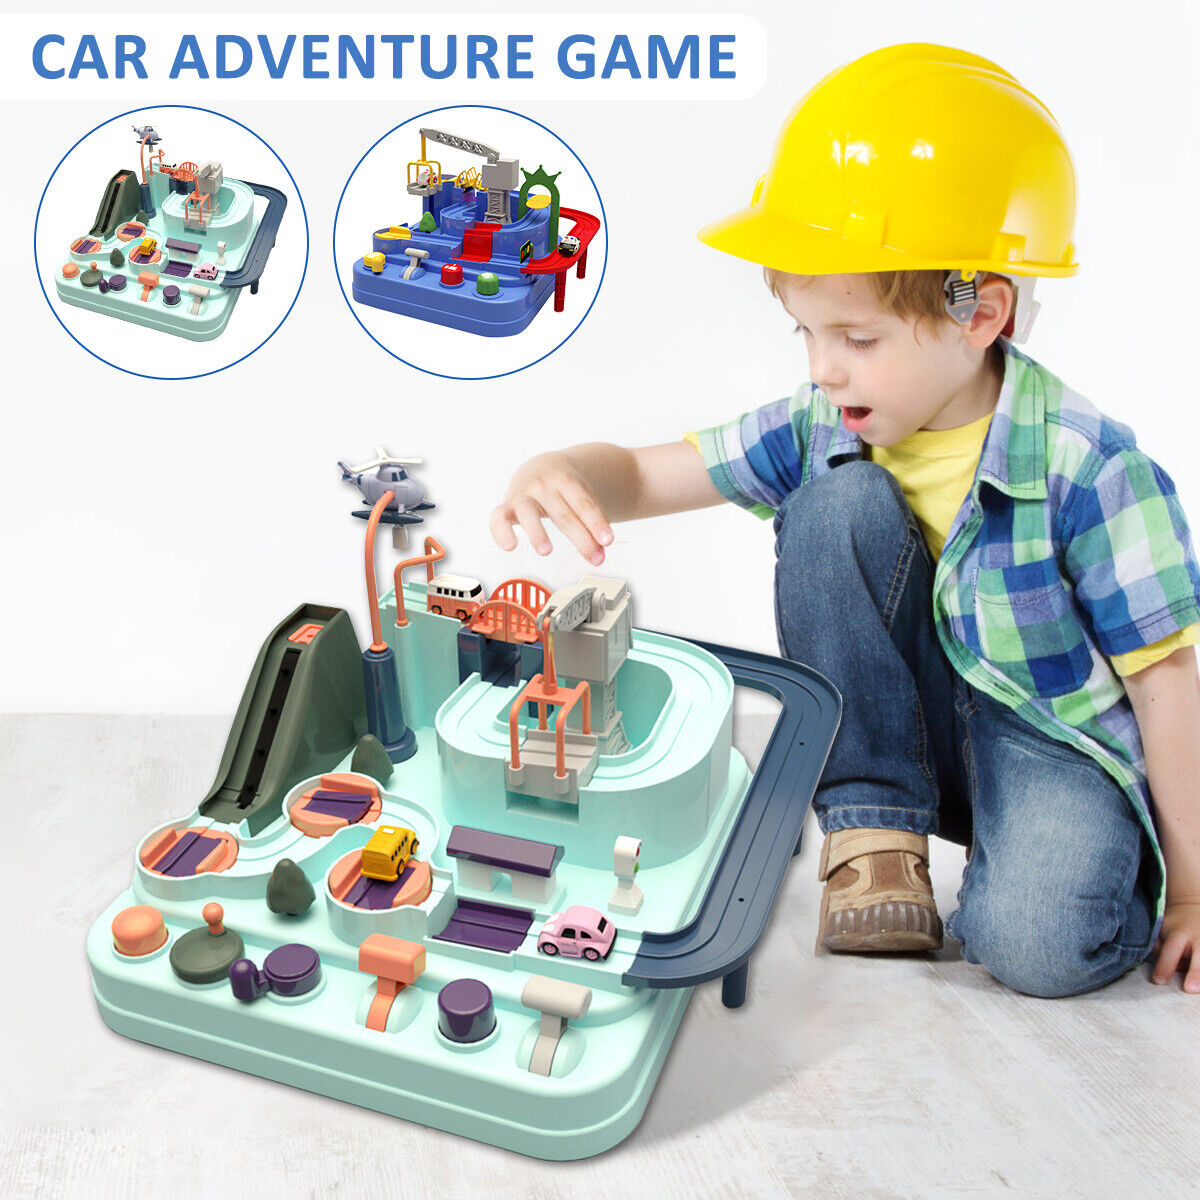 Car Adventure Game Educational Toy